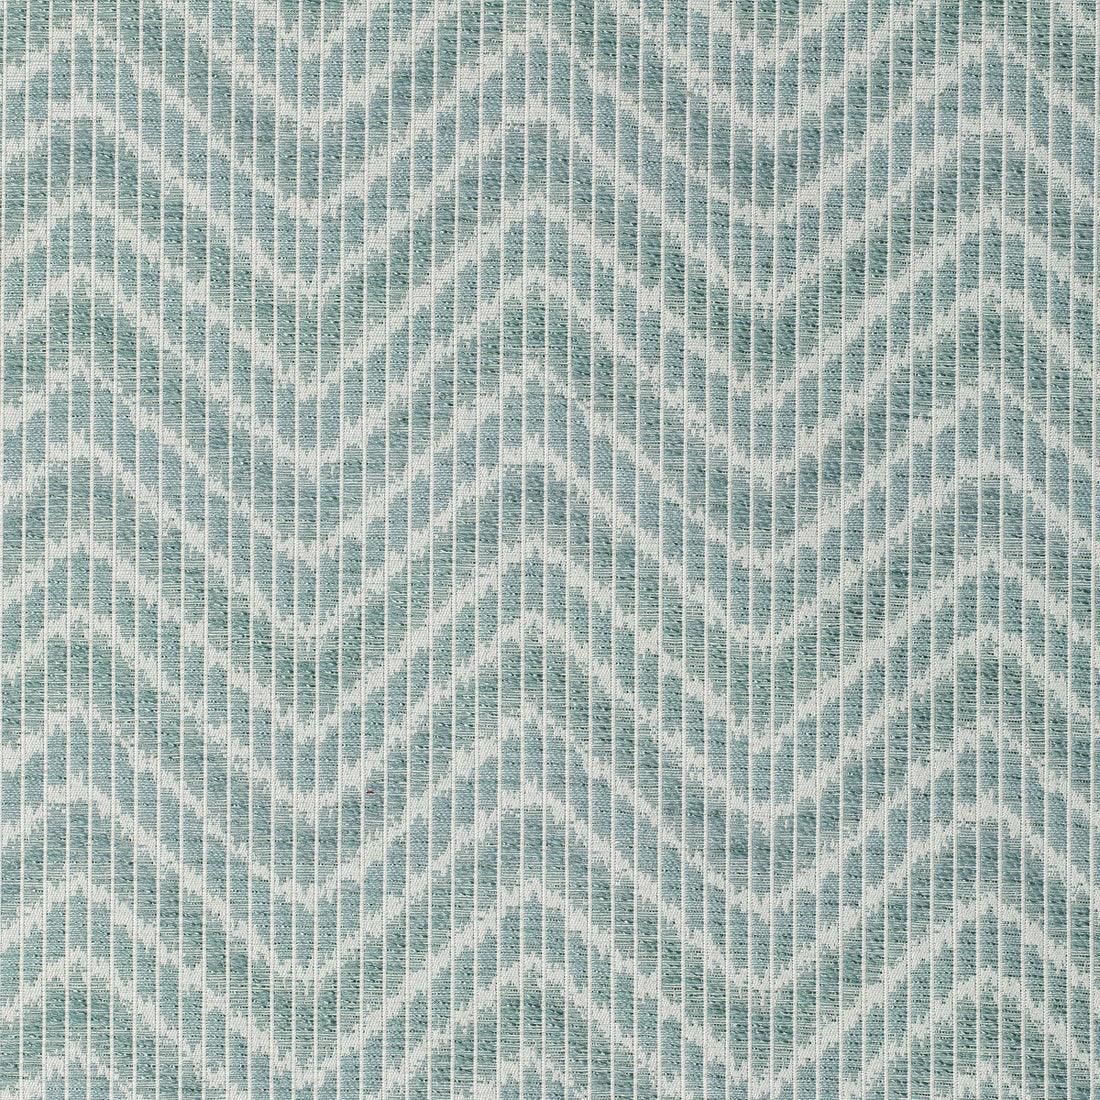 Chausey Woven fabric in aqua color - pattern 8020106.113.0 - by Brunschwig &amp; Fils in the Granville Weaves collection